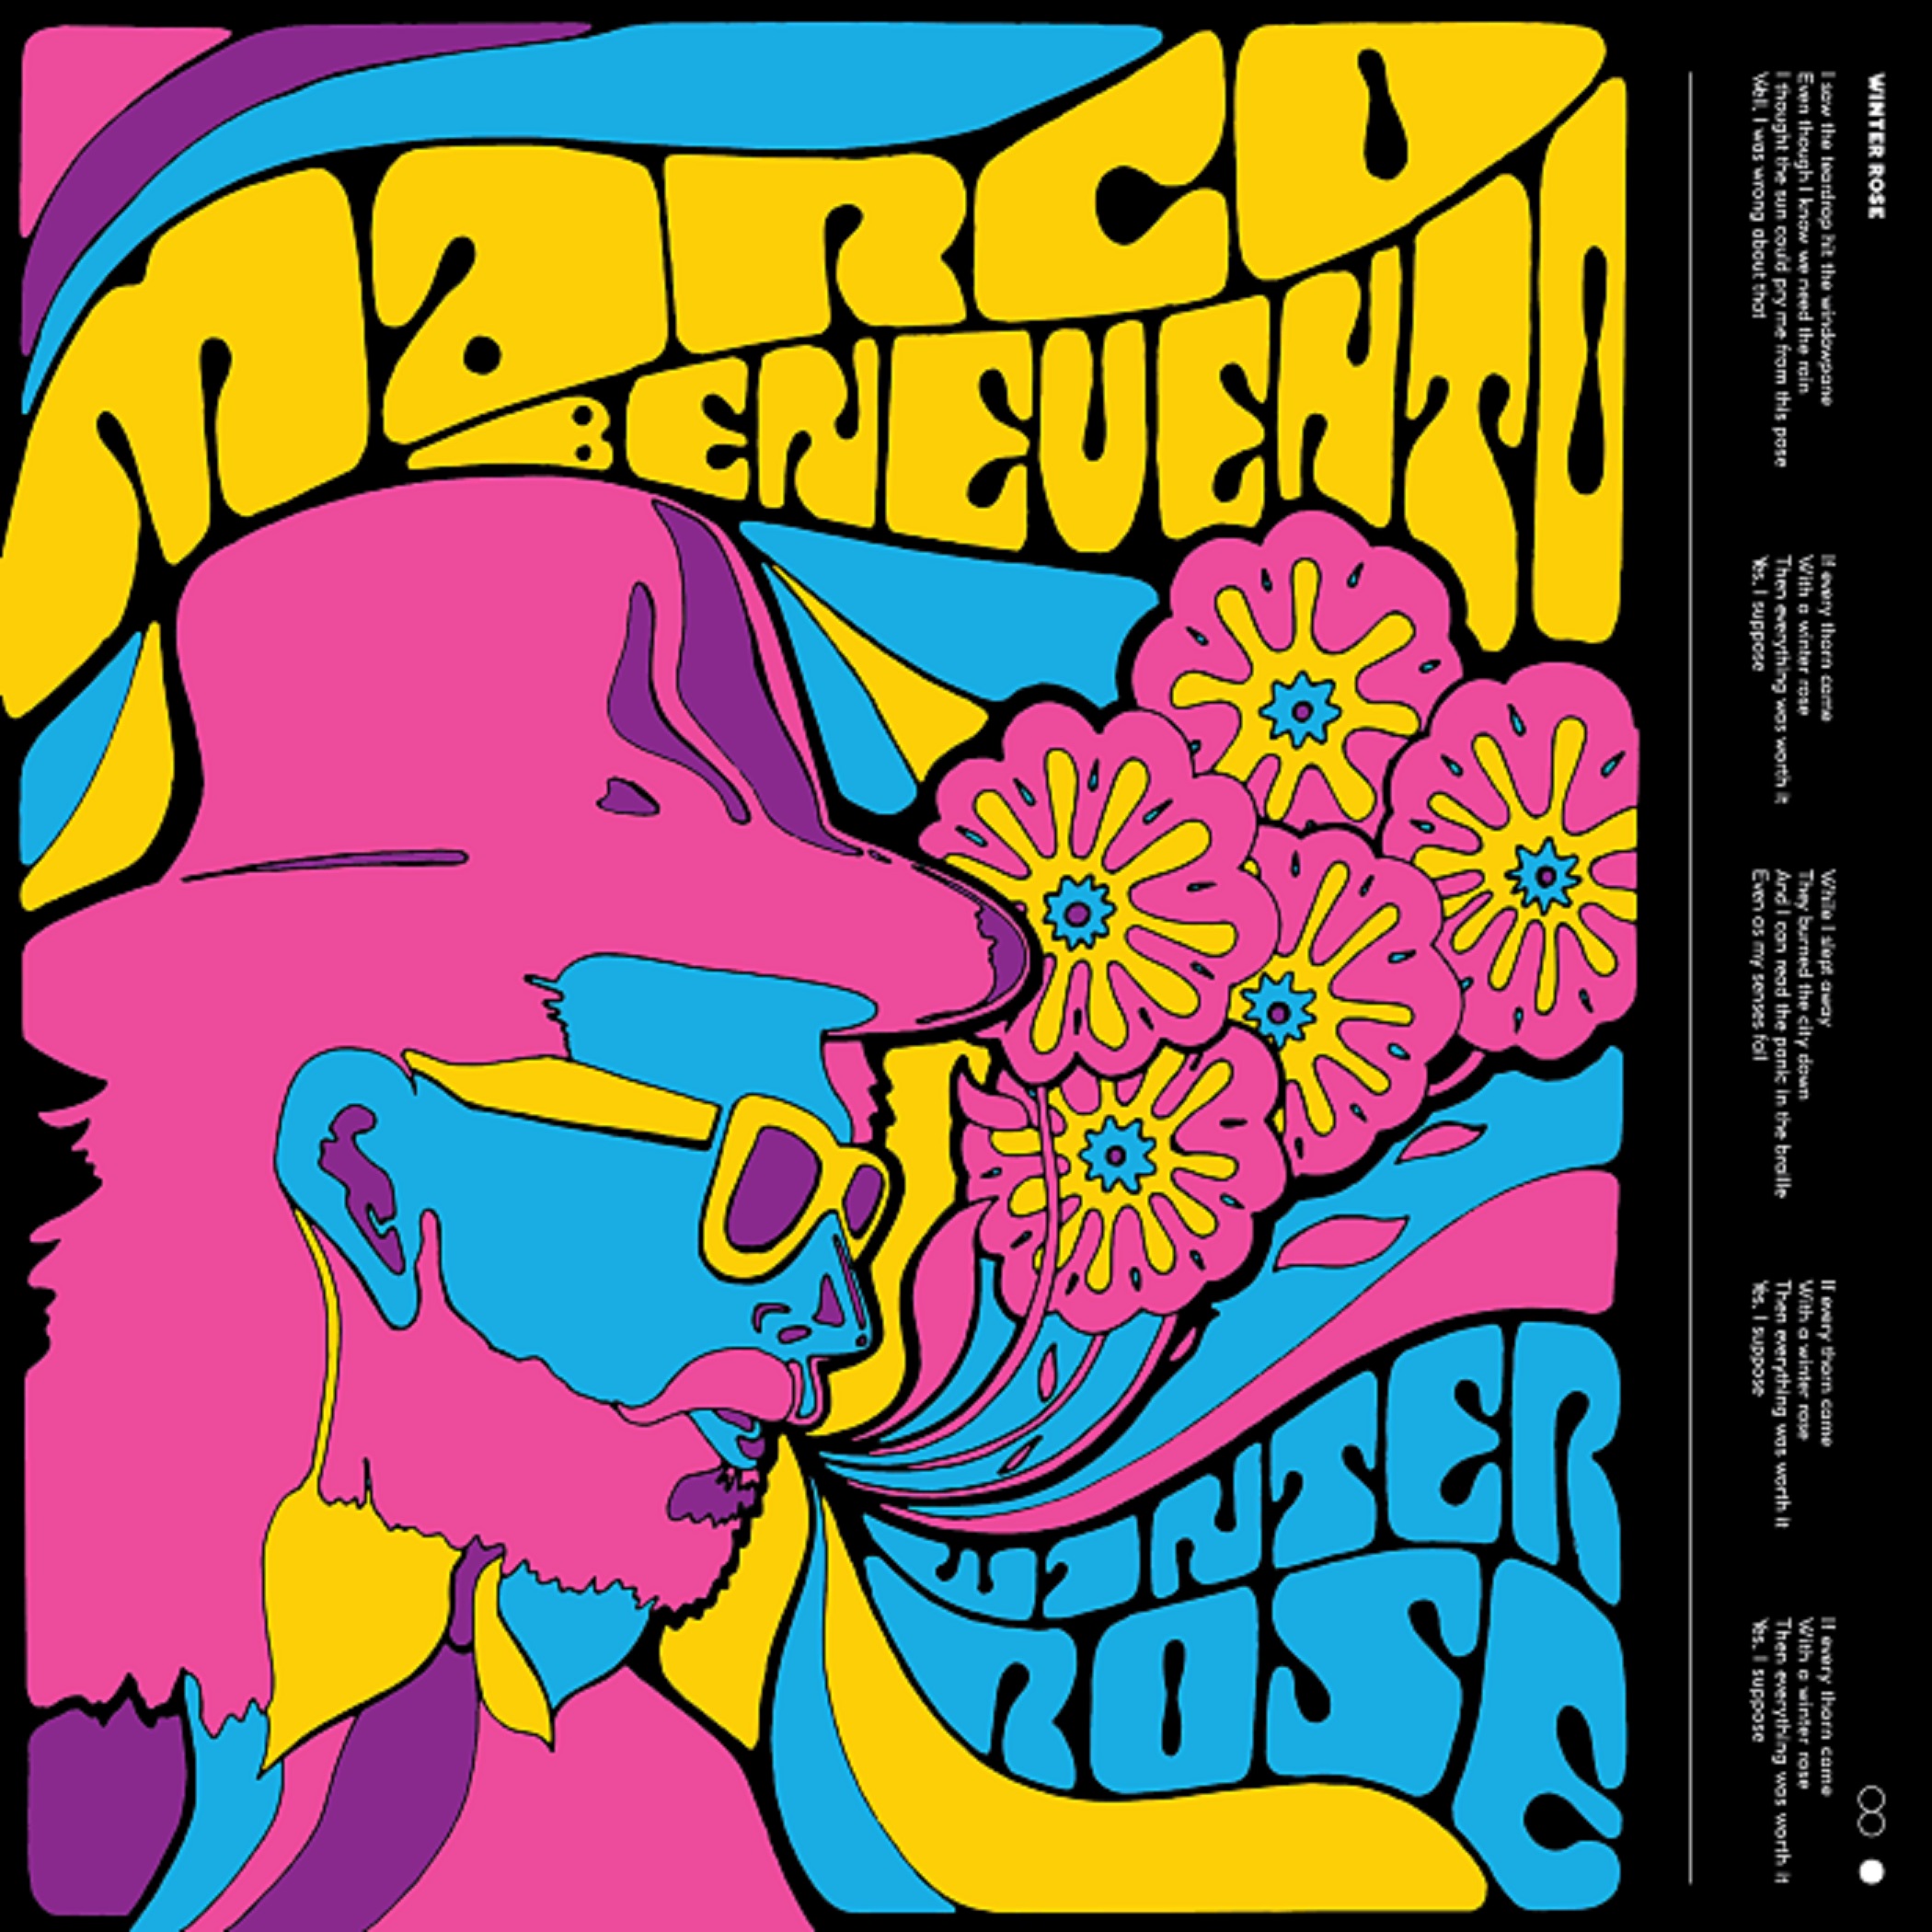 Marco Benevento "Winter Rose" | New Single Out Today